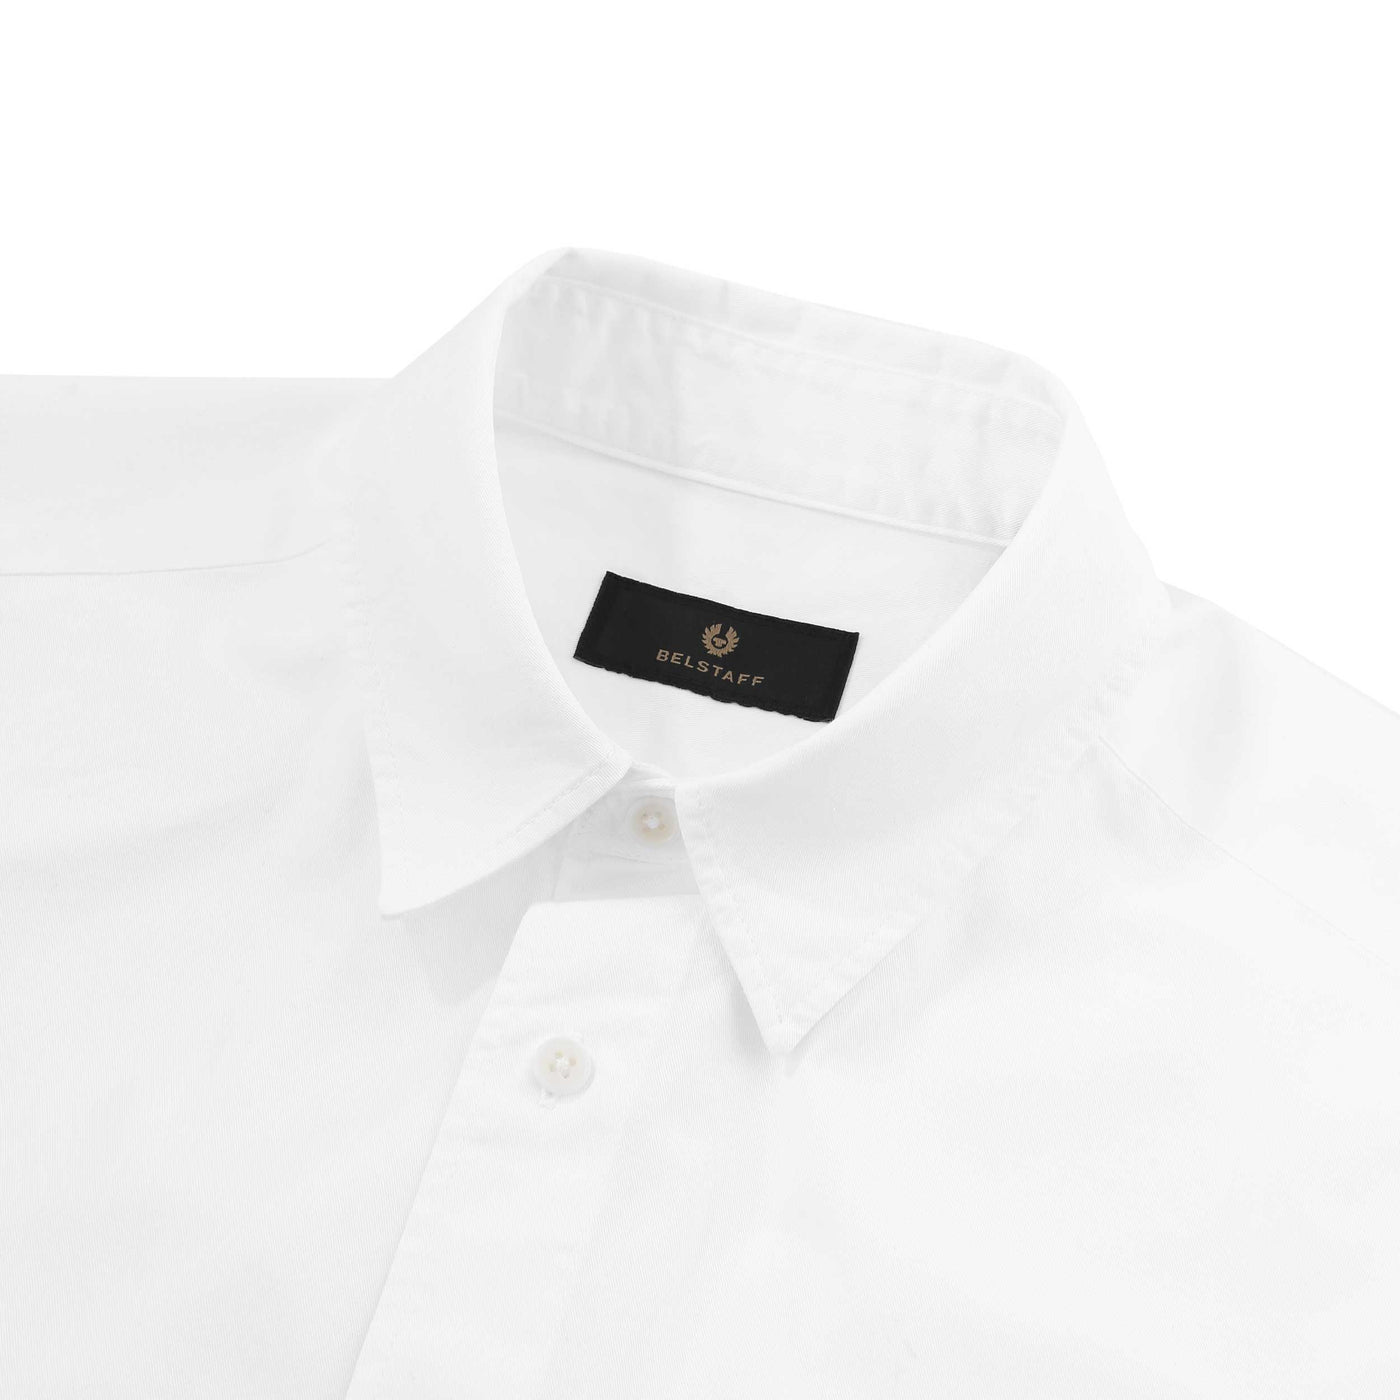 Belstaff Scale SS Shirt in White Collar